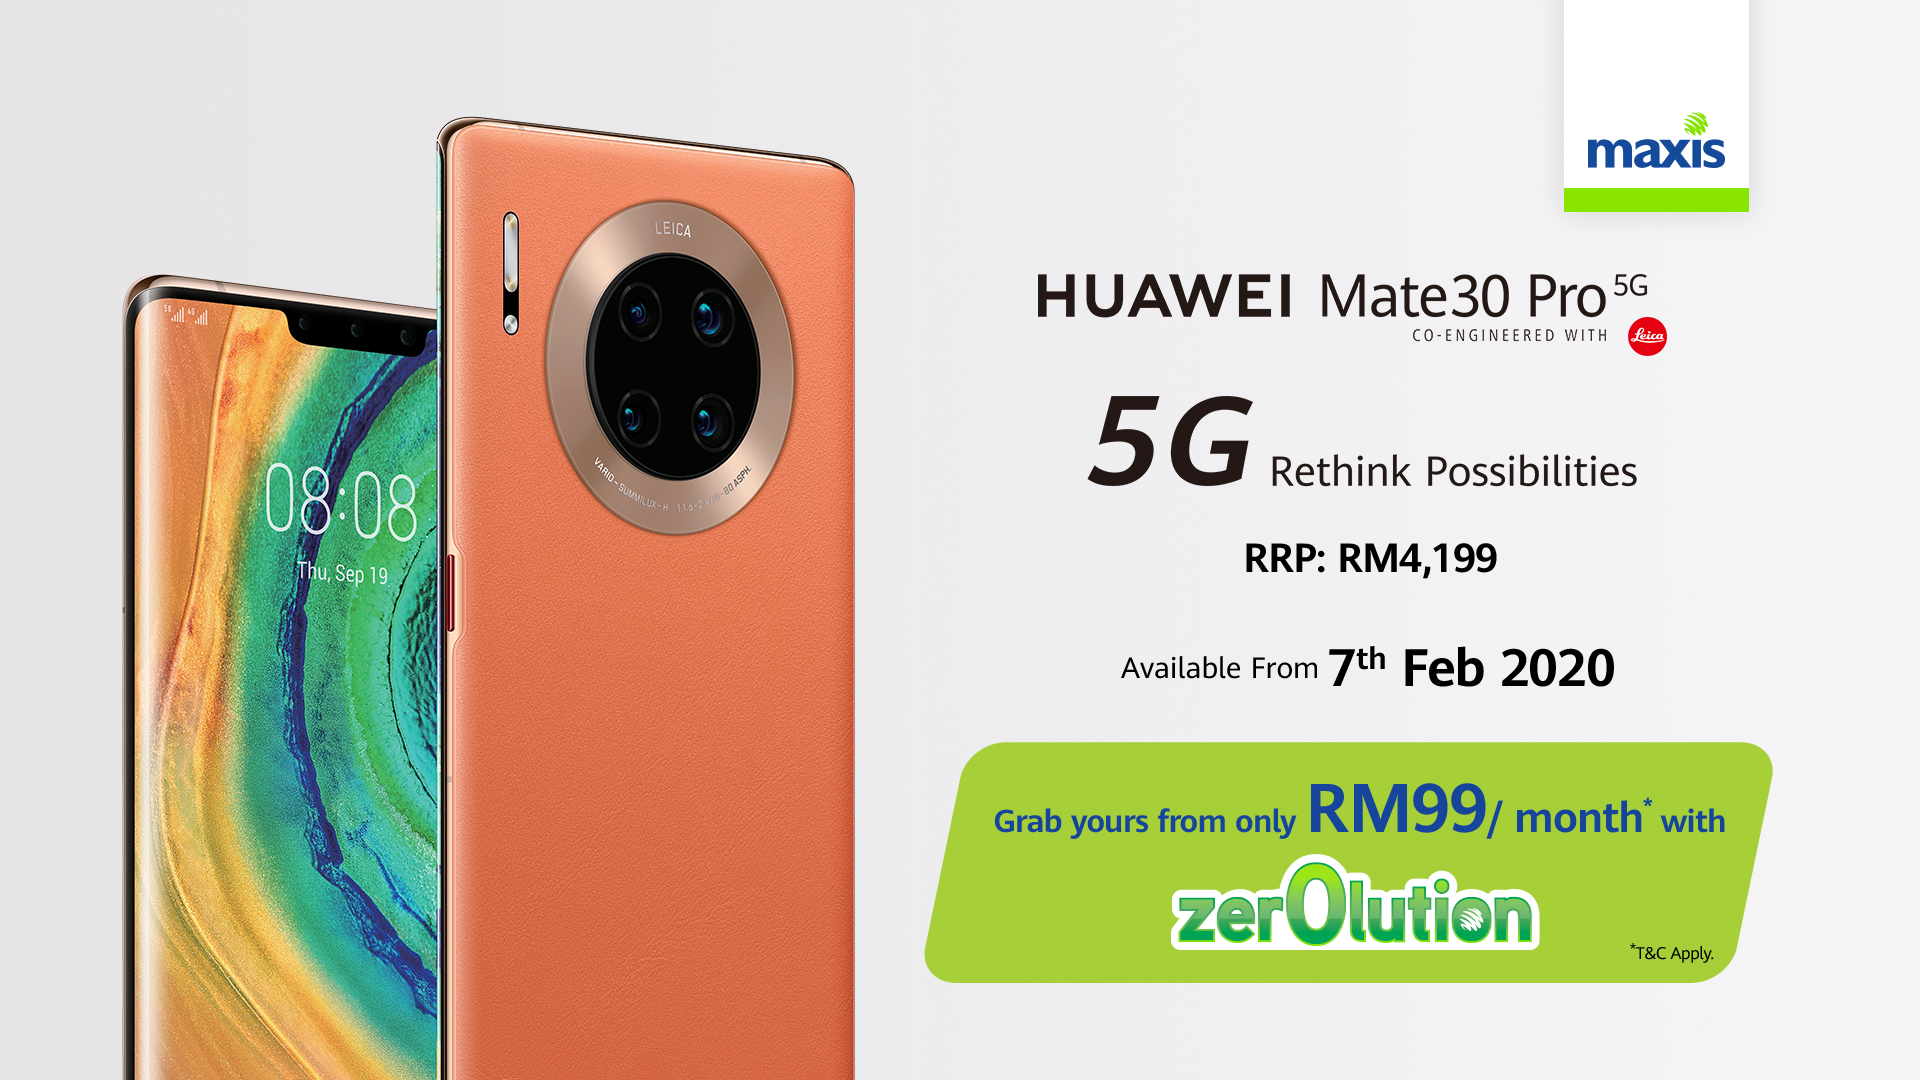 Mate30 Pro 5G Maxis